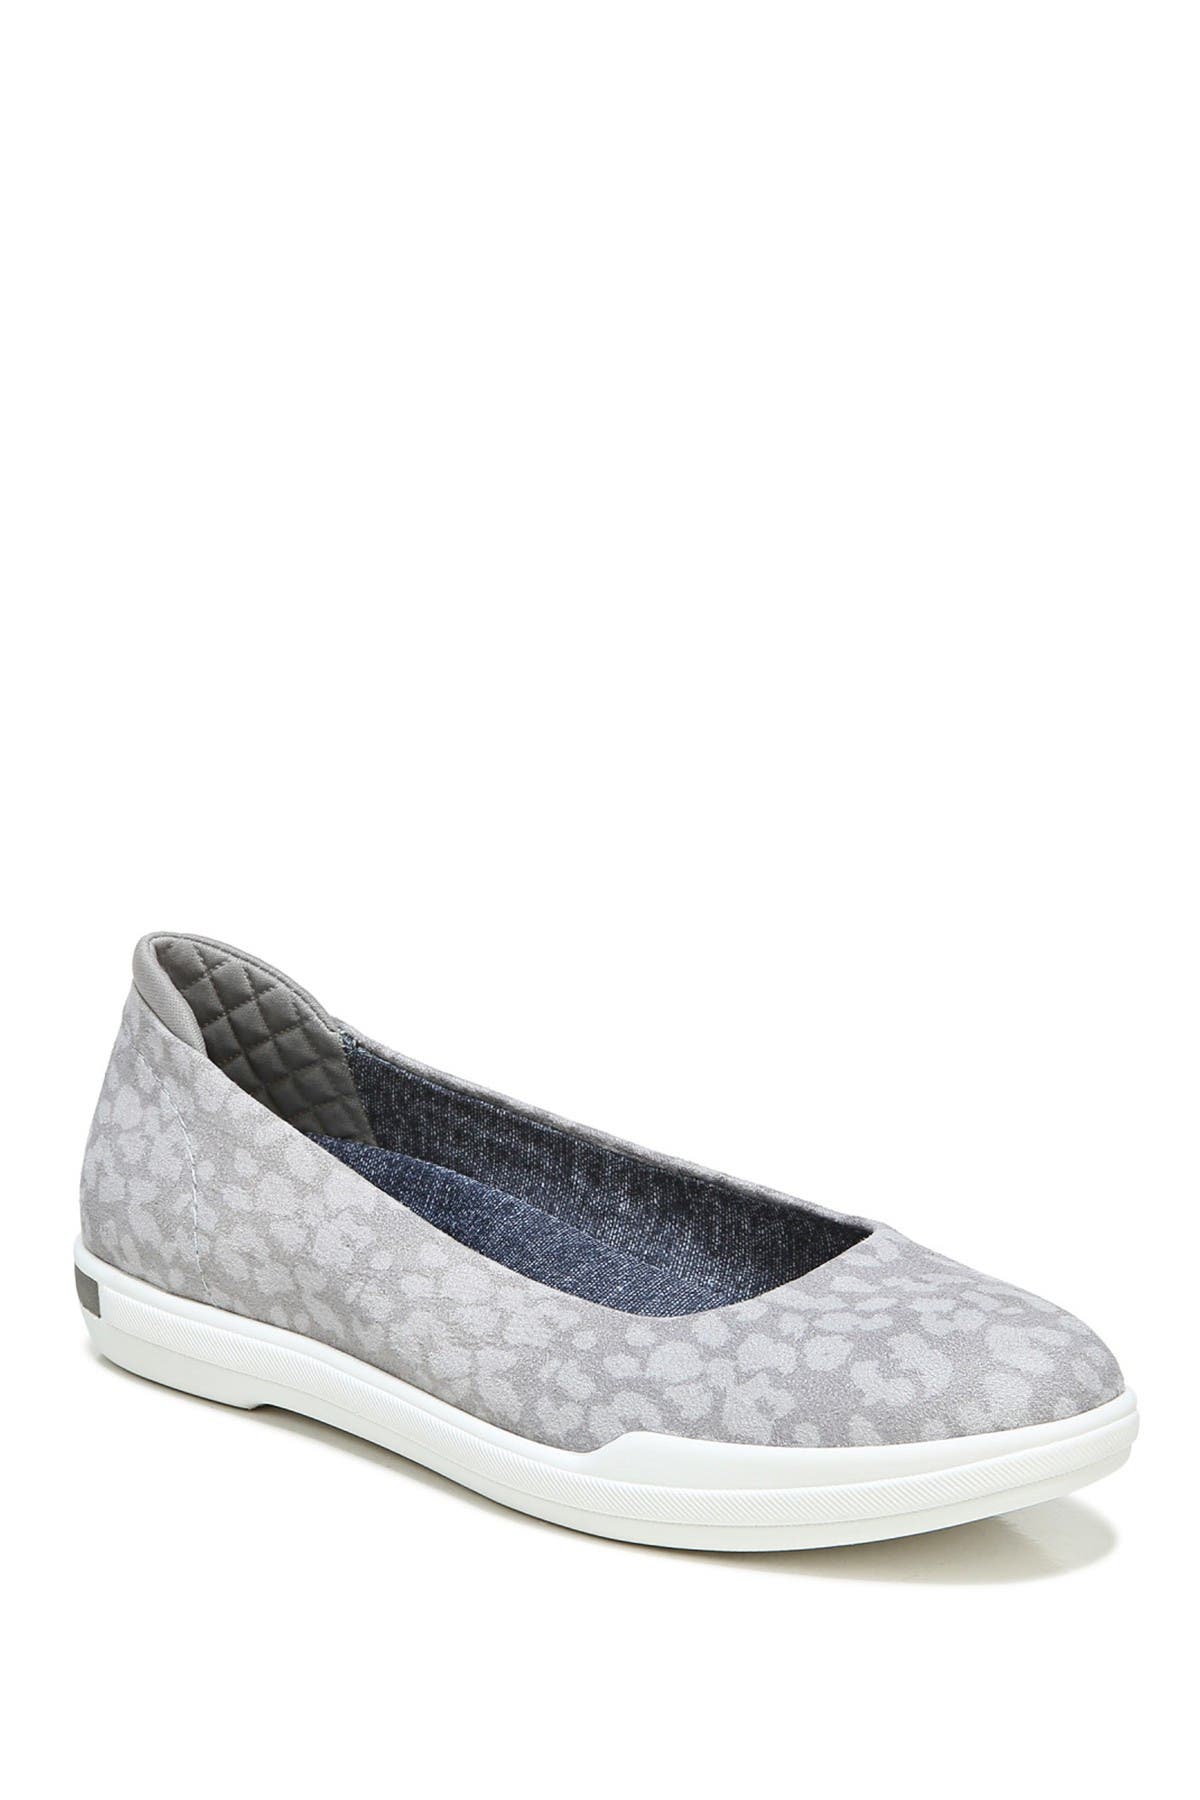 Dr. Scholl's Rise Shine Flat In Softgrey